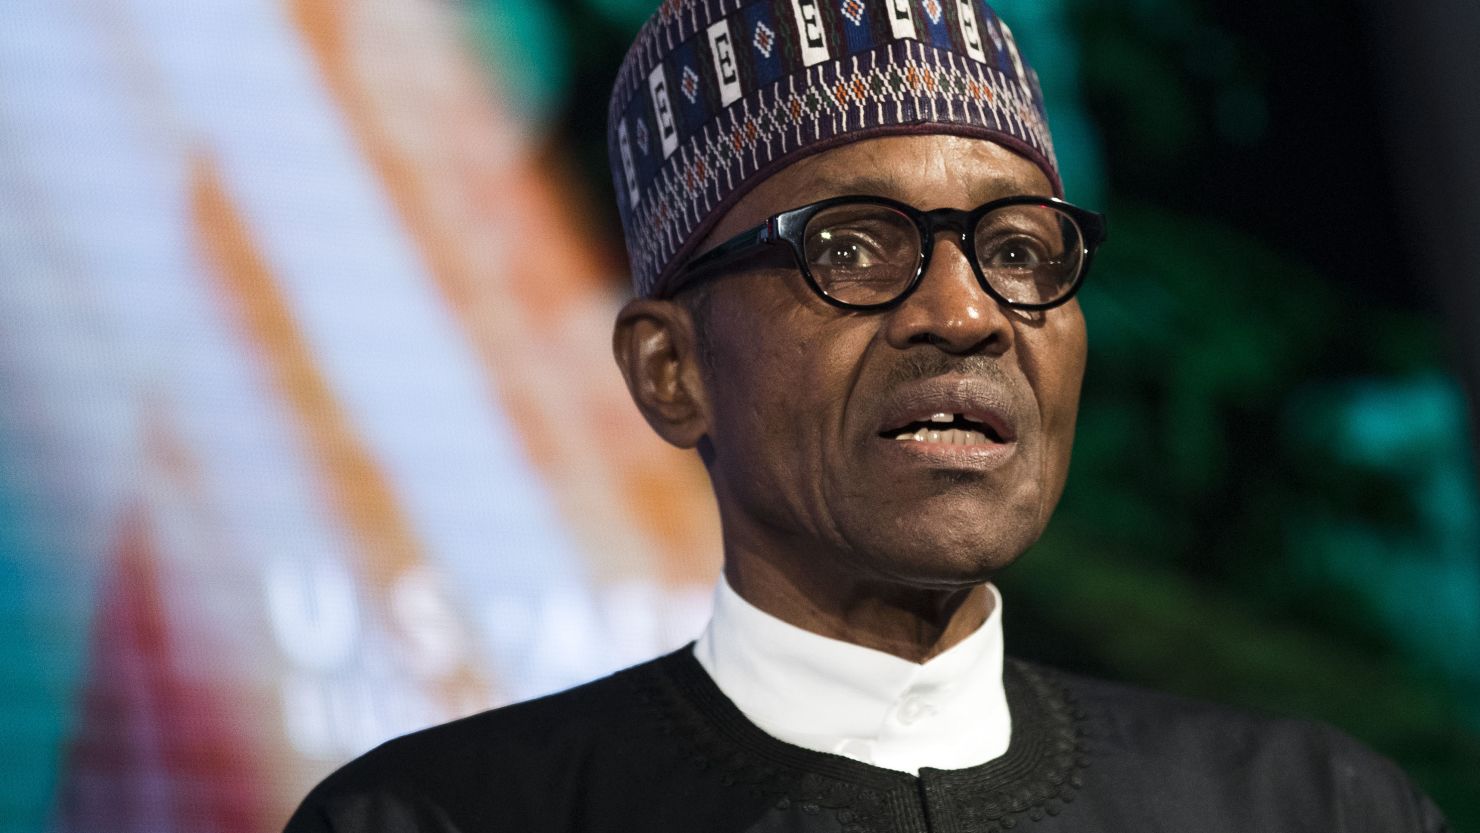 Muhammadu Buhari returned to Nigeria after nearly two months away.